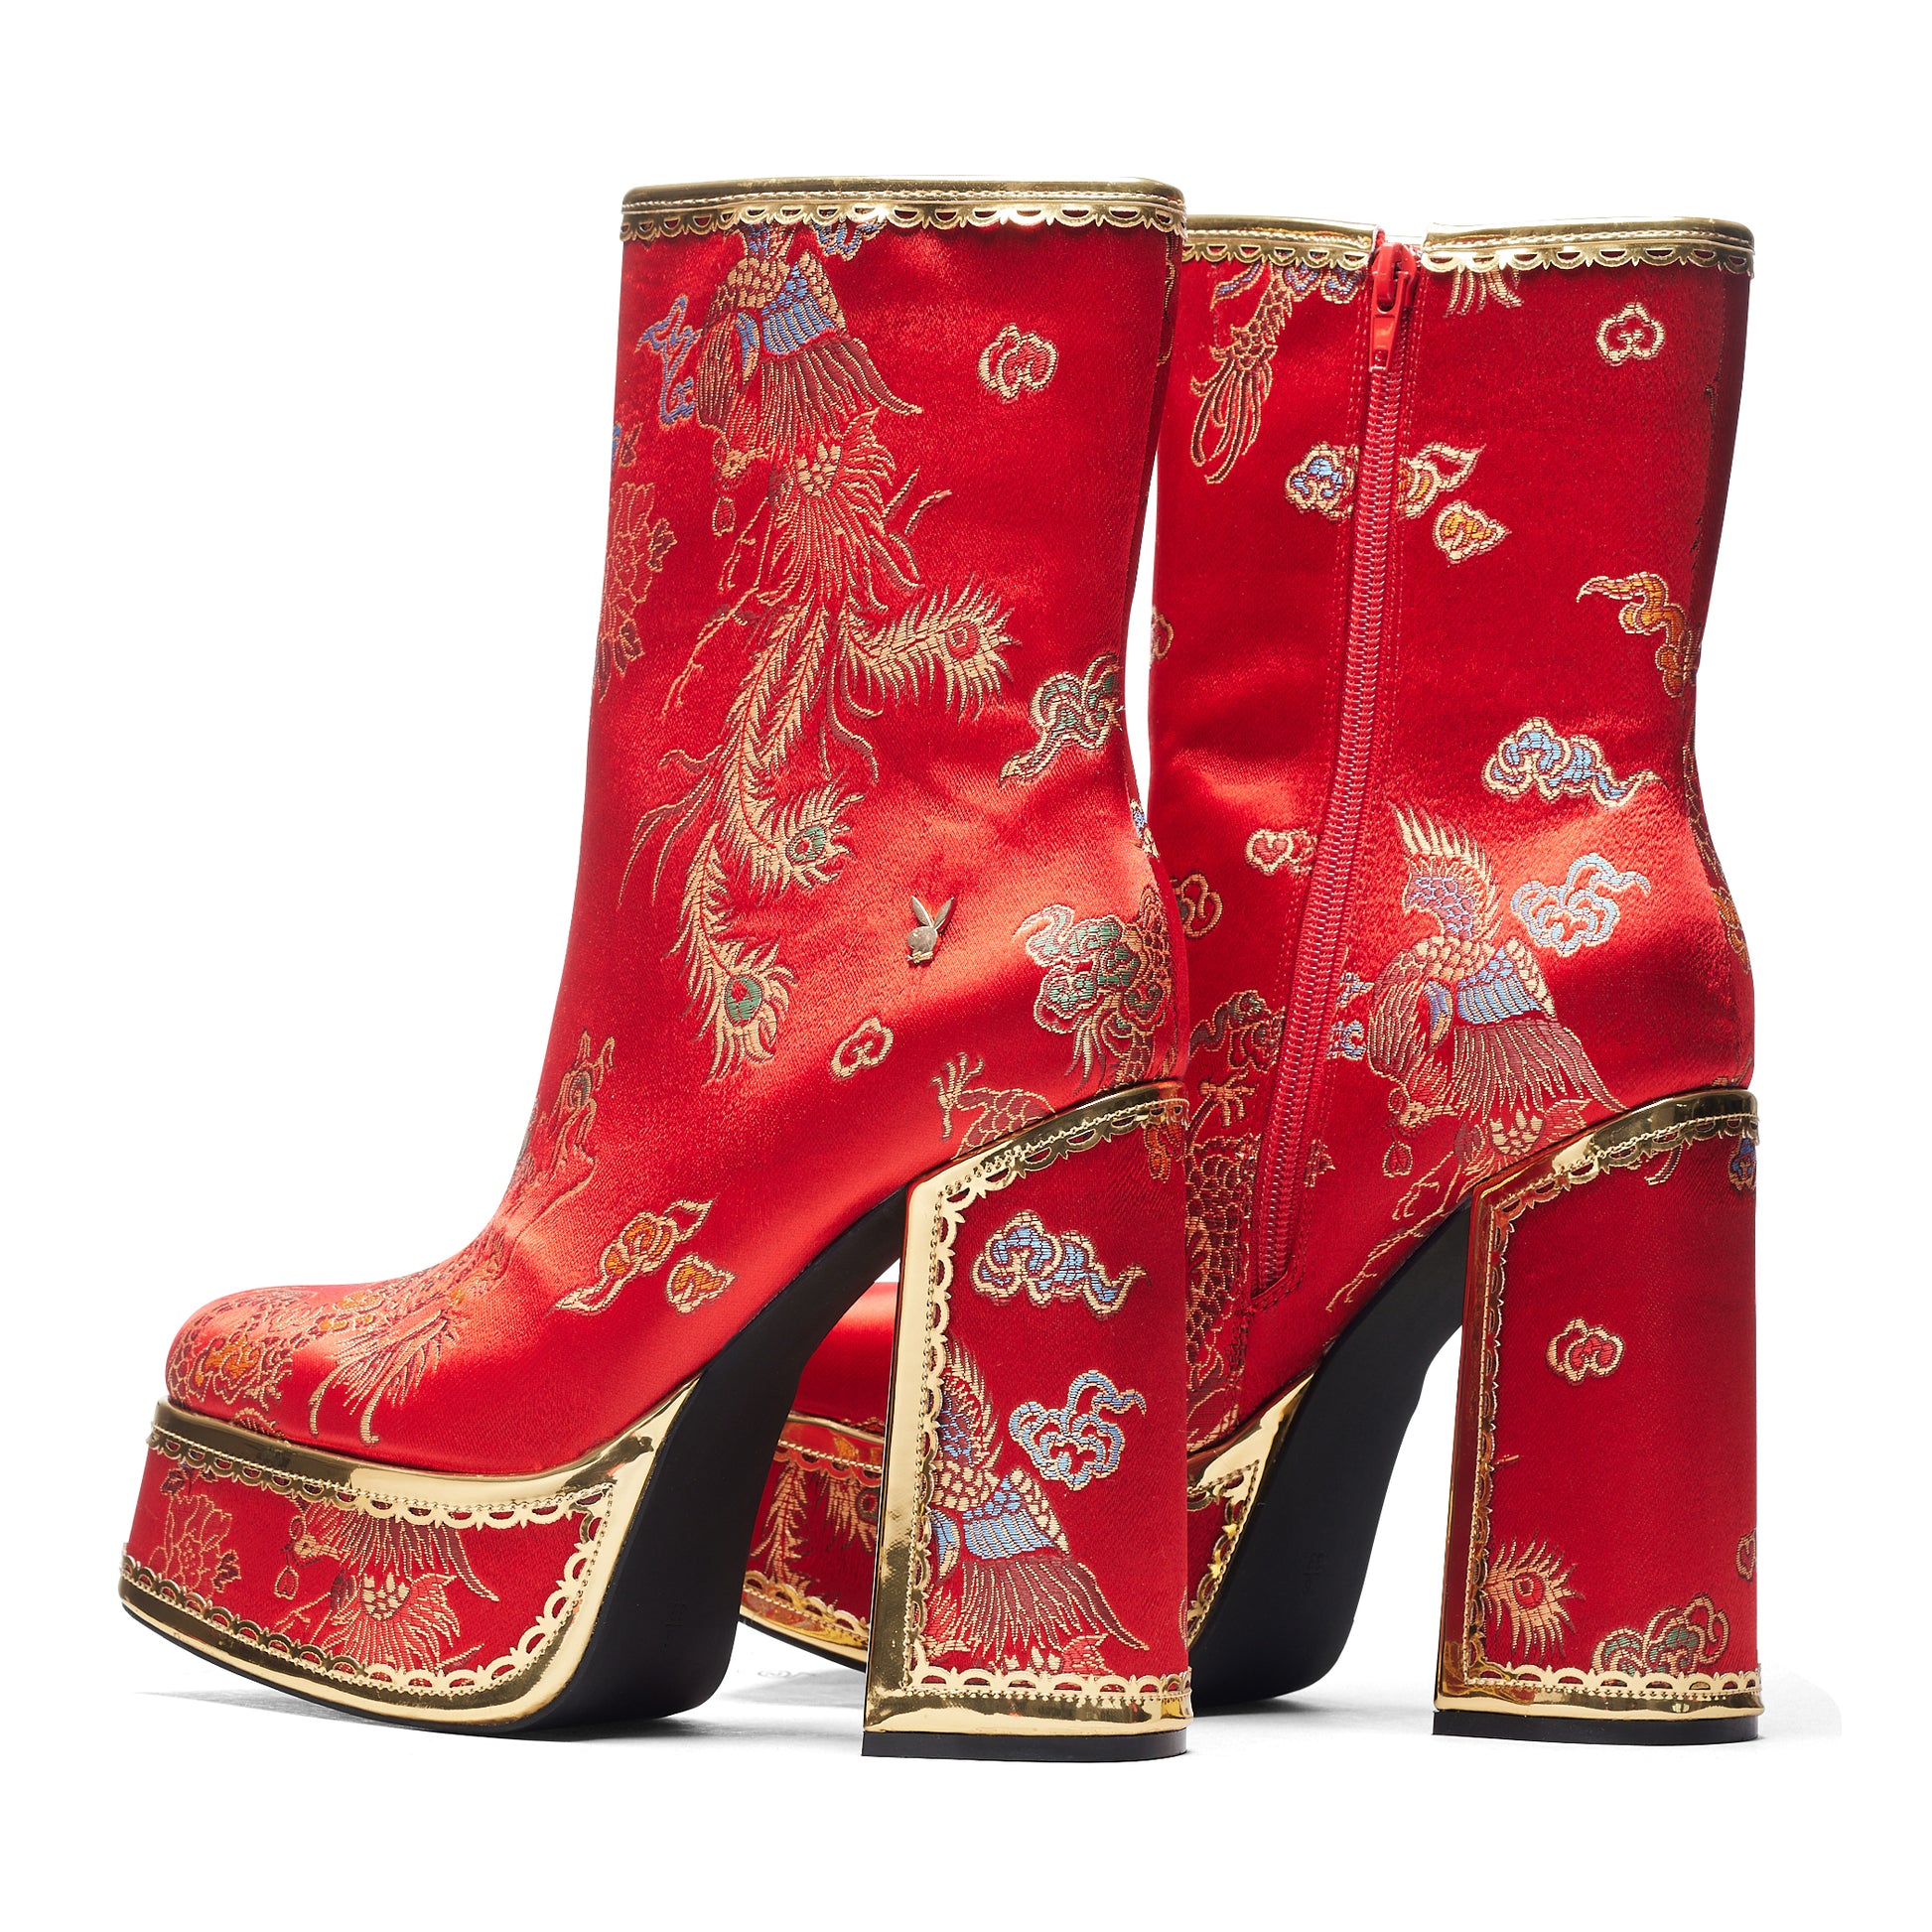 The Ornate Soul Playboy Red Heeled Boots - Ankle Boots - KOI Footwear - Red - Back View